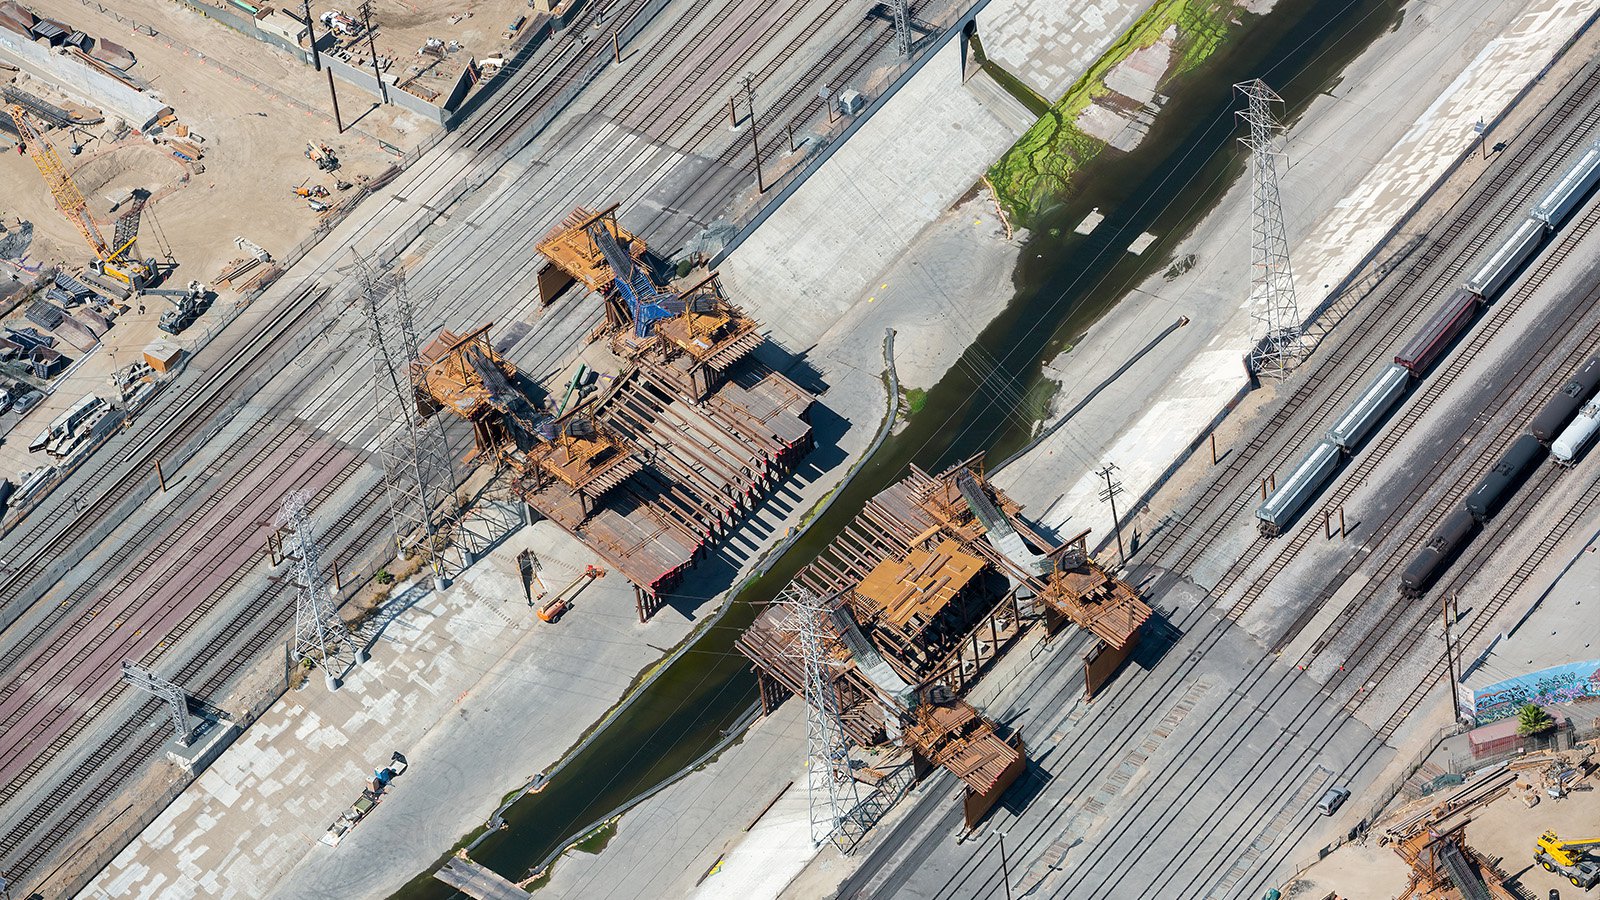 Blog photograph of the Sixth Street Bridge construction crossing the LA River, connecting Boyle Heights and Downtown Los Angeles, California